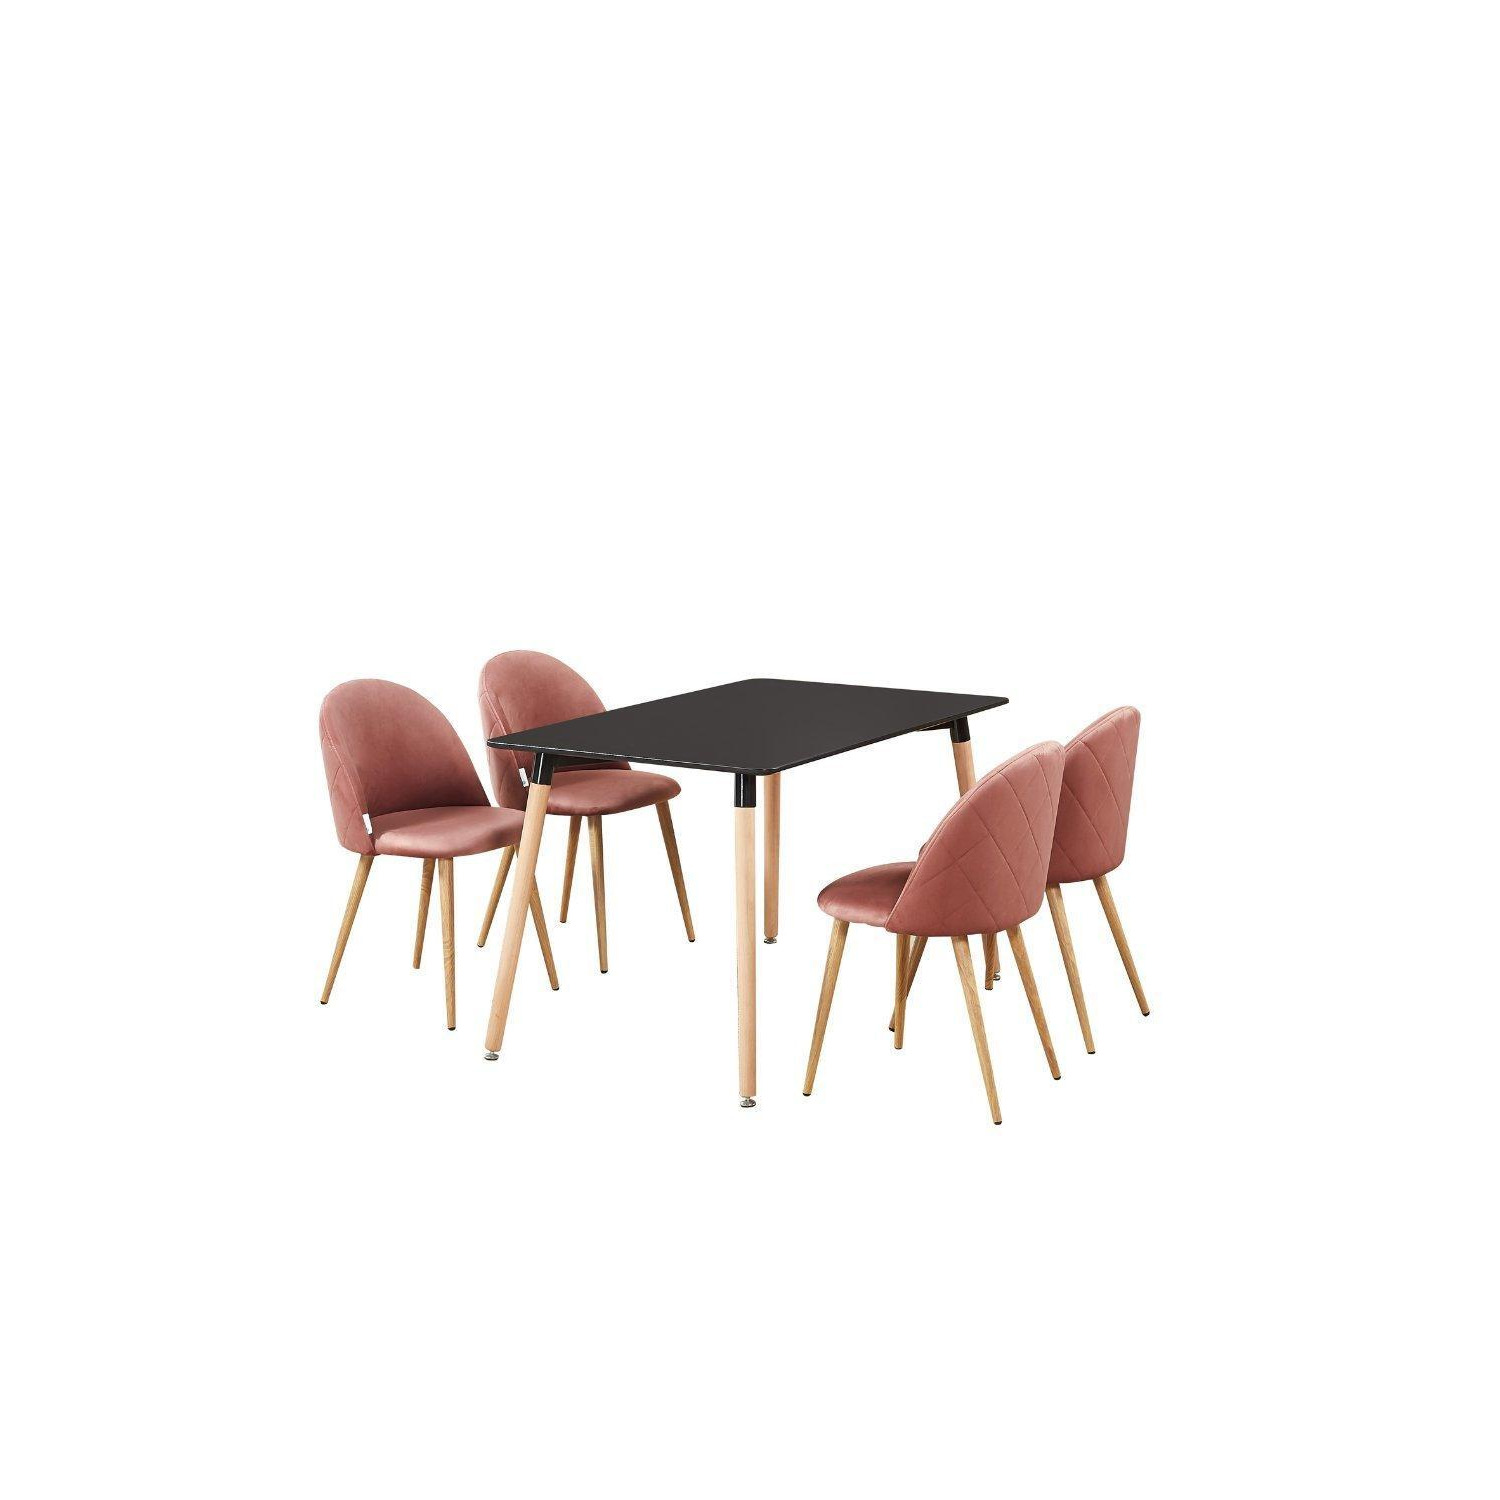 'Lucia Halo' Dining Set with a Table and Chairs Set of 4 - image 1